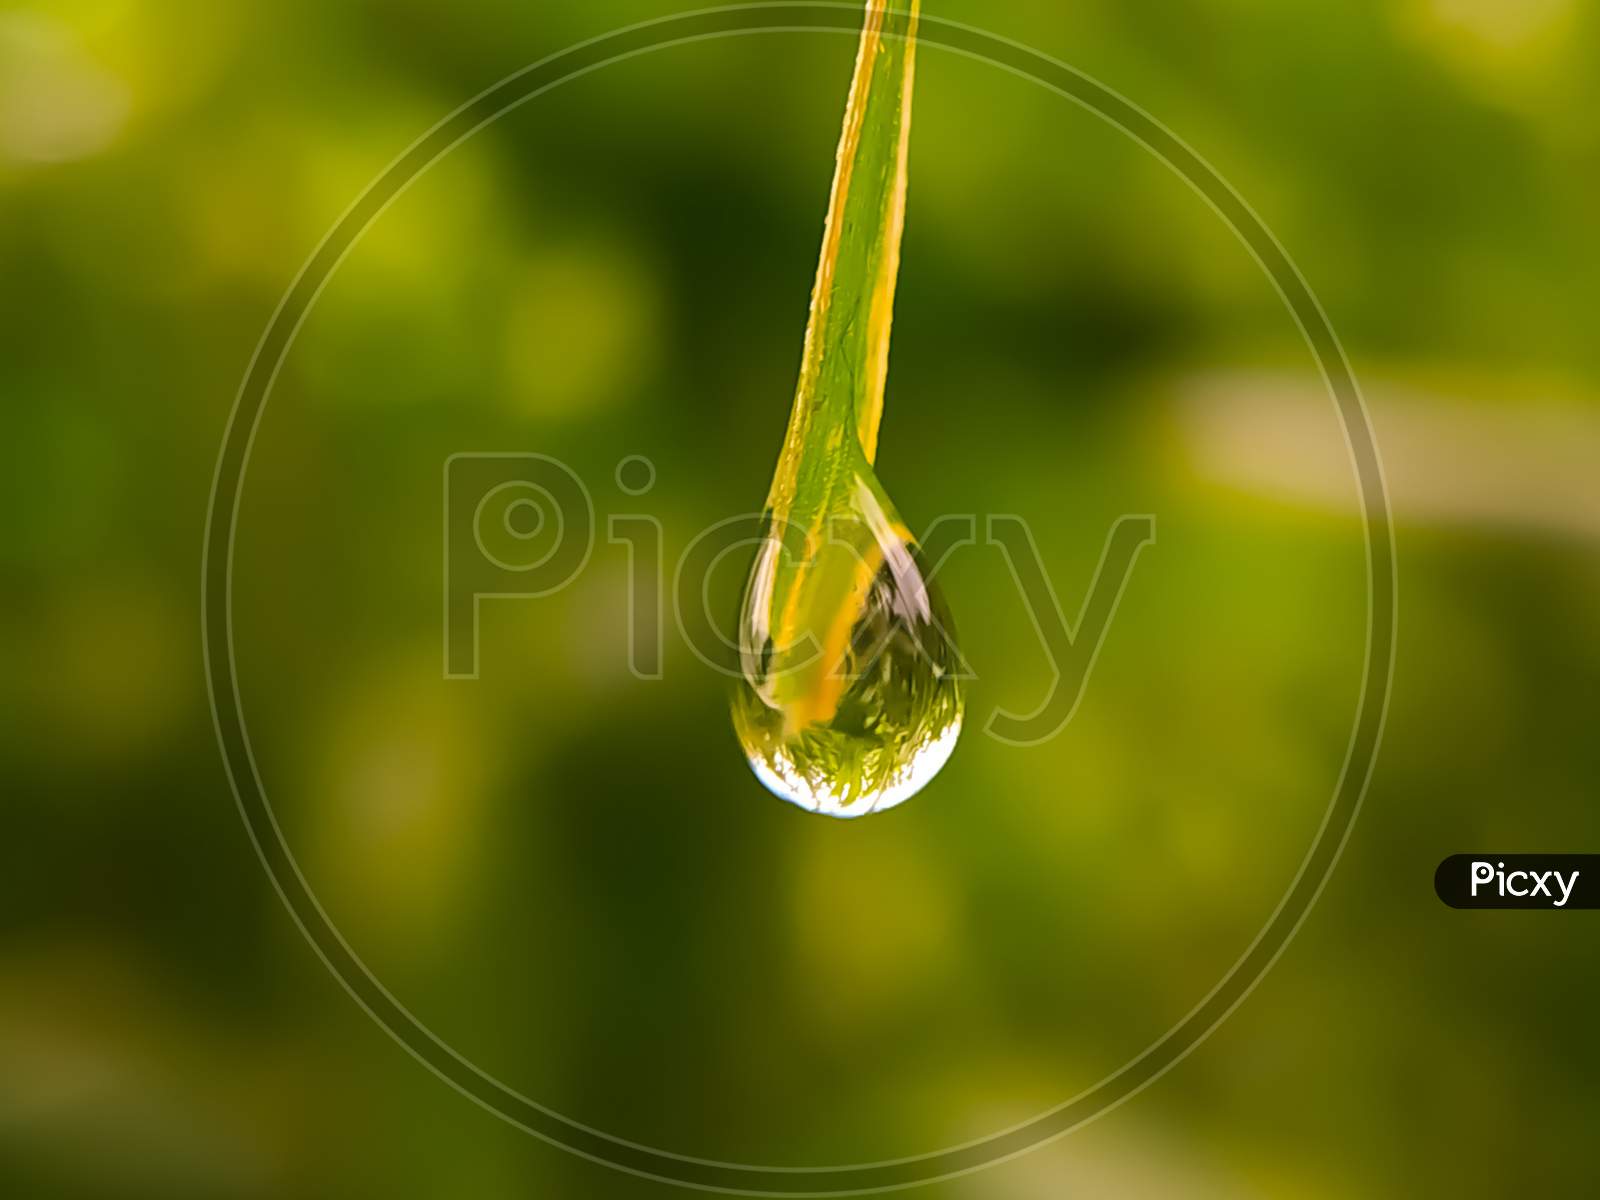 Drop Of Water On Green Leaf